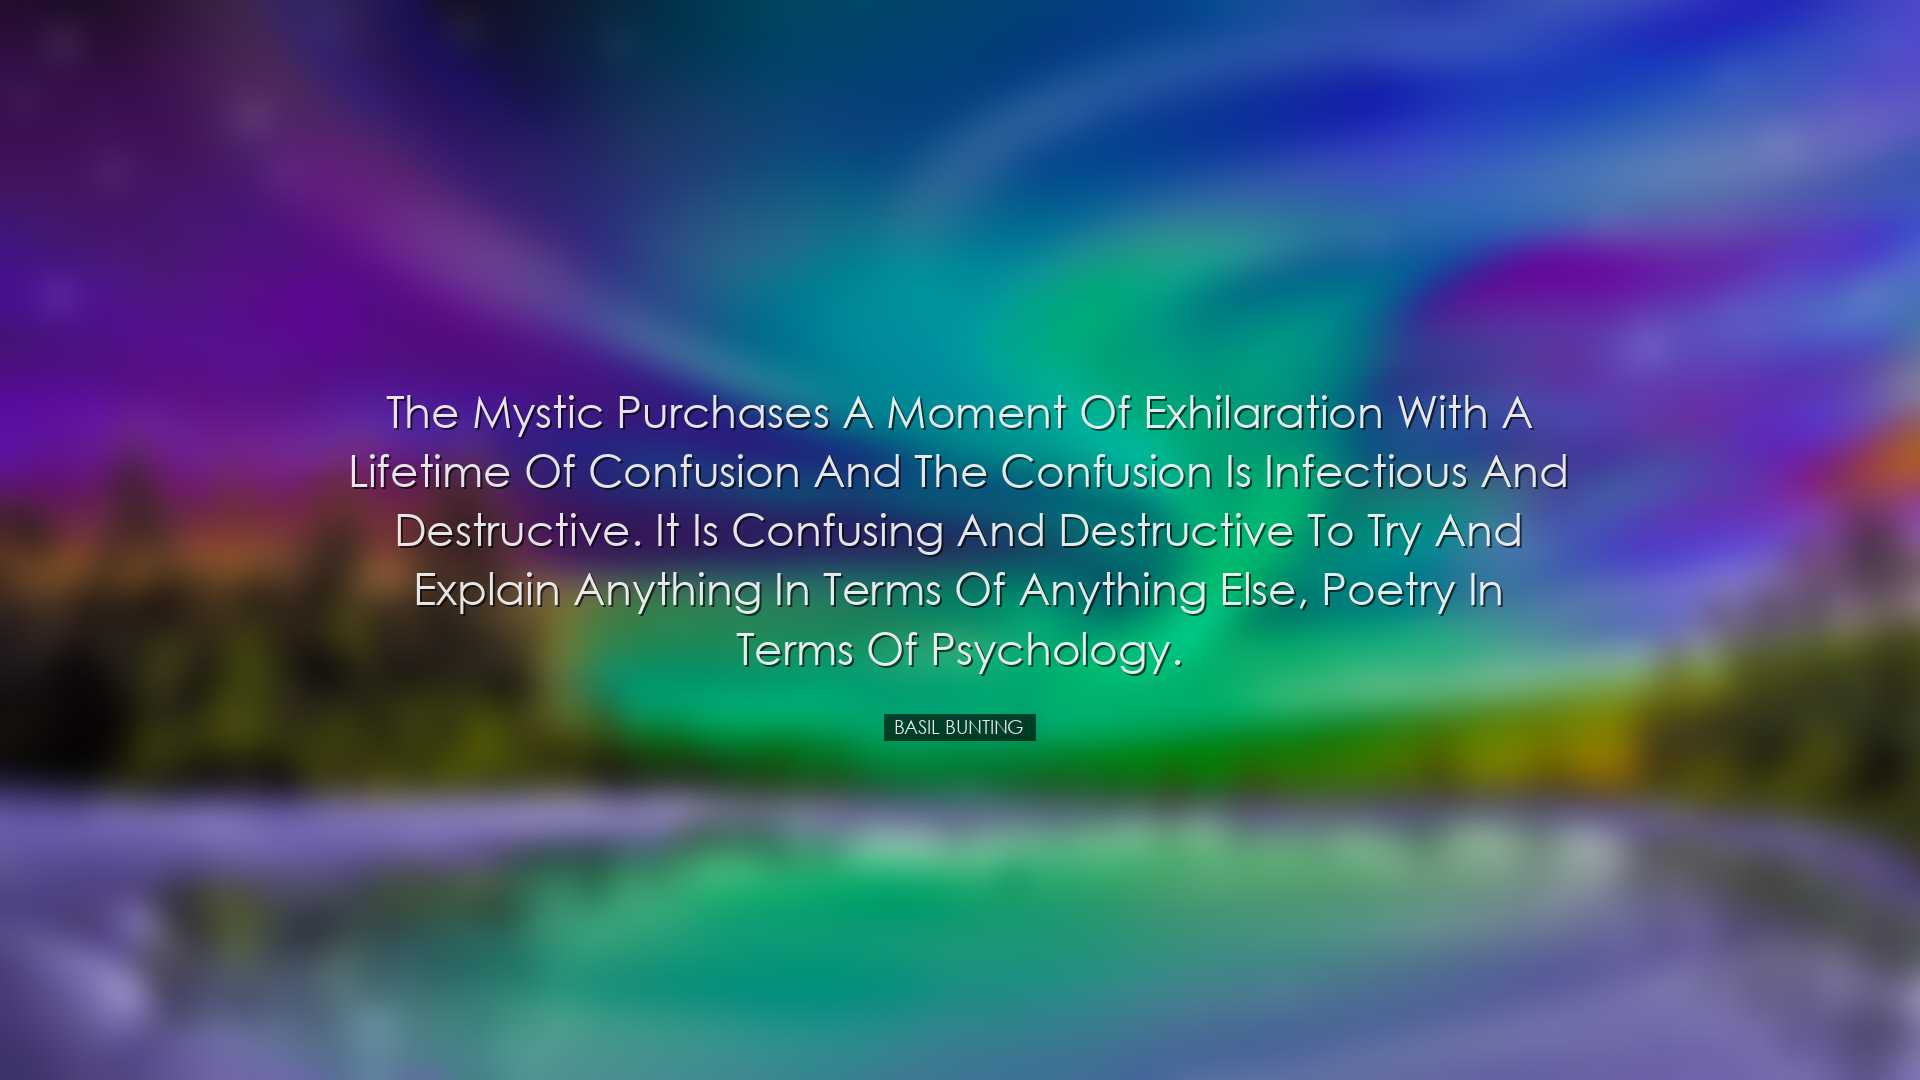 The mystic purchases a moment of exhilaration with a lifetime of c